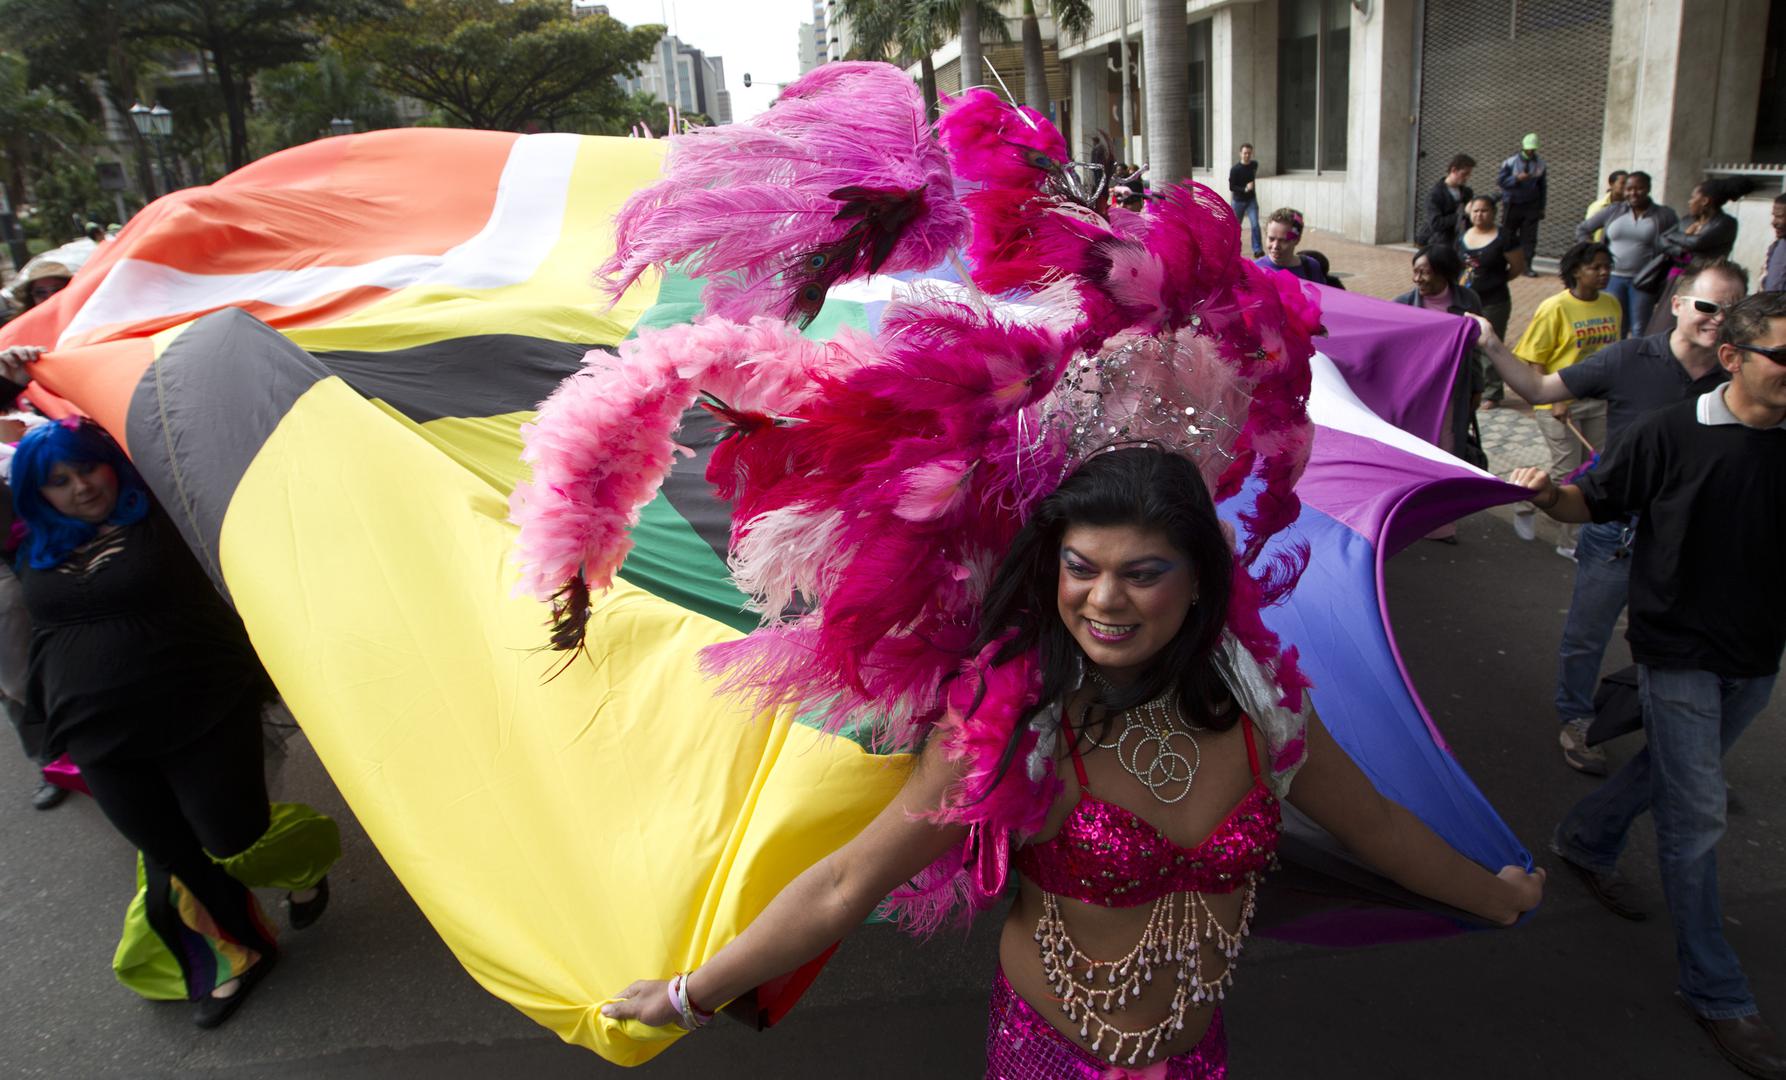 A drag queen participates in Durban Pride in Durban, South Africa, July 30, 2011.